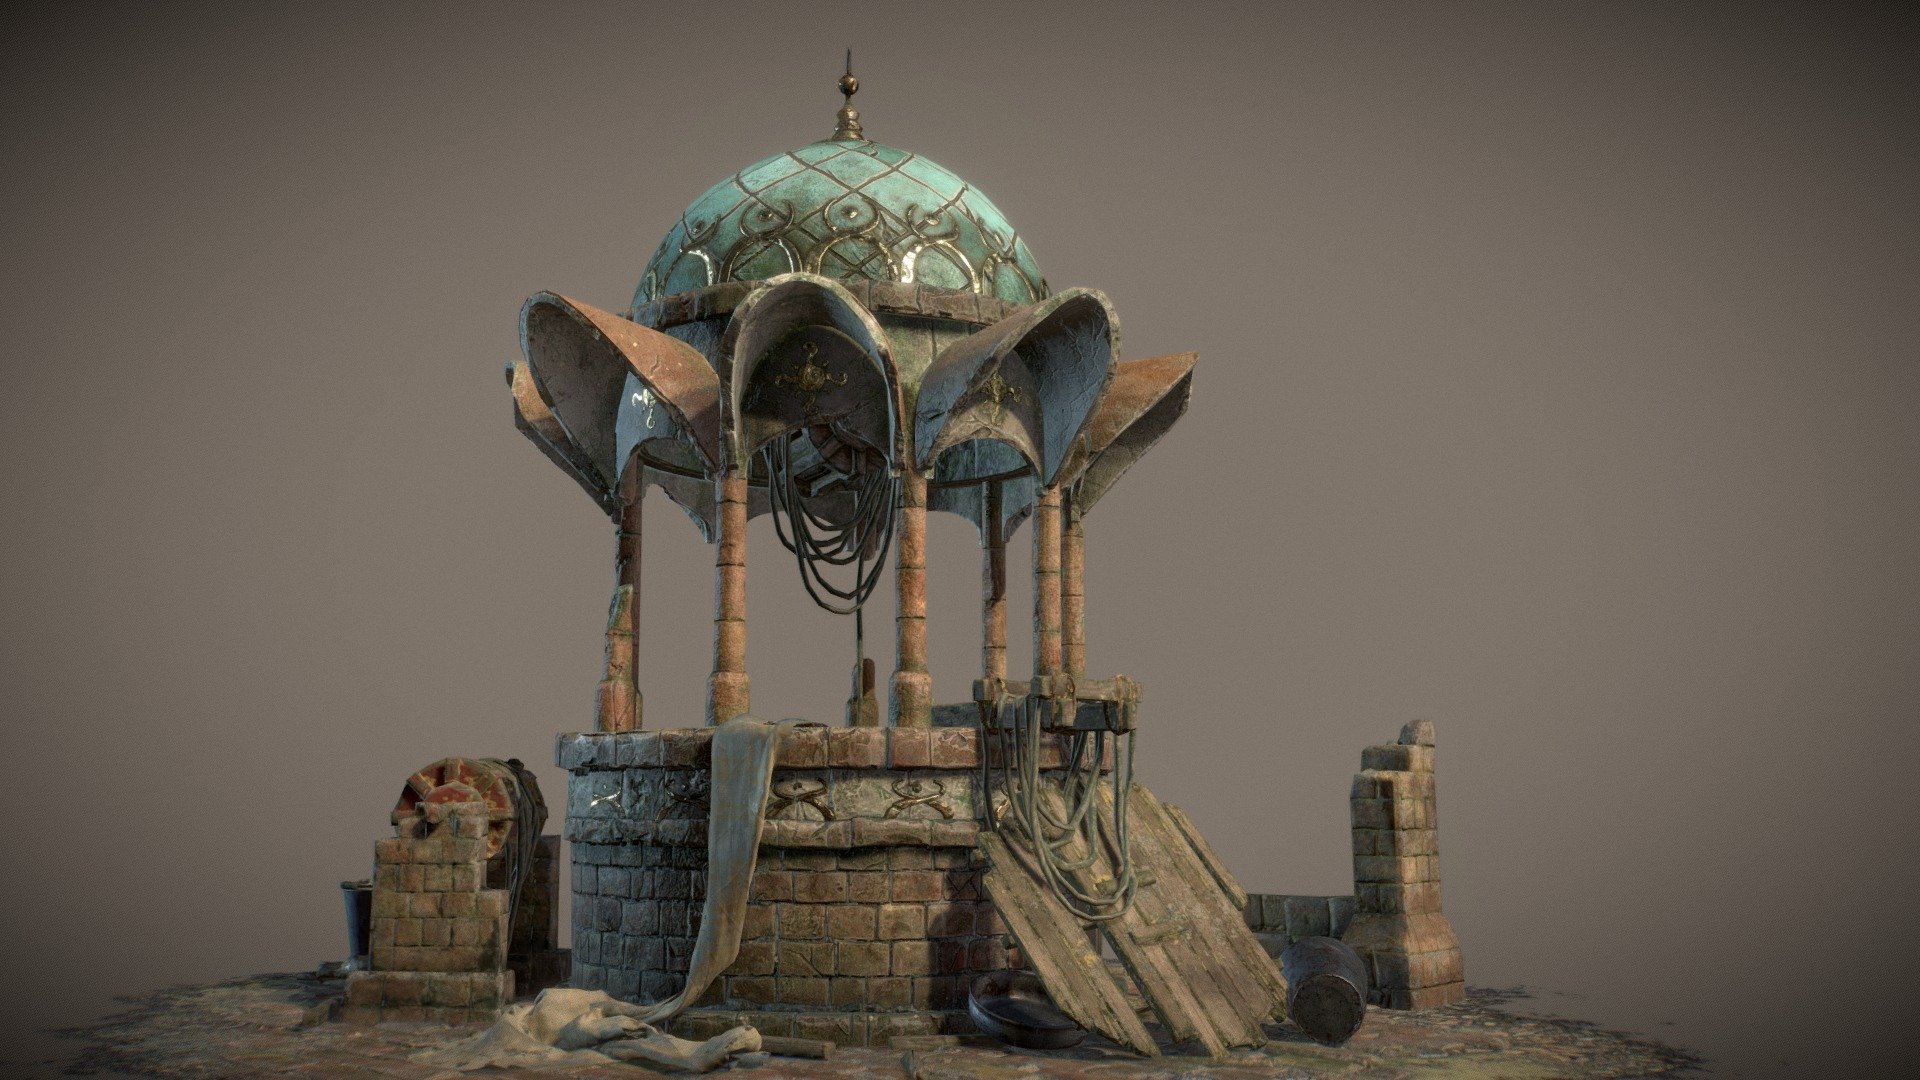 Midpoly old well.
Concept by Whihoon Lee (whinbek)
https://www.artstation.com/artist/whinbek
Have a small seam on the roof cuz i moved Uvs a bit and miss this seam when exported a model :)
More shots from IRAY : https://www.artstation.com/artwork/16qbZ - Seymour Stone Well - 3D model by DorinD 3d model